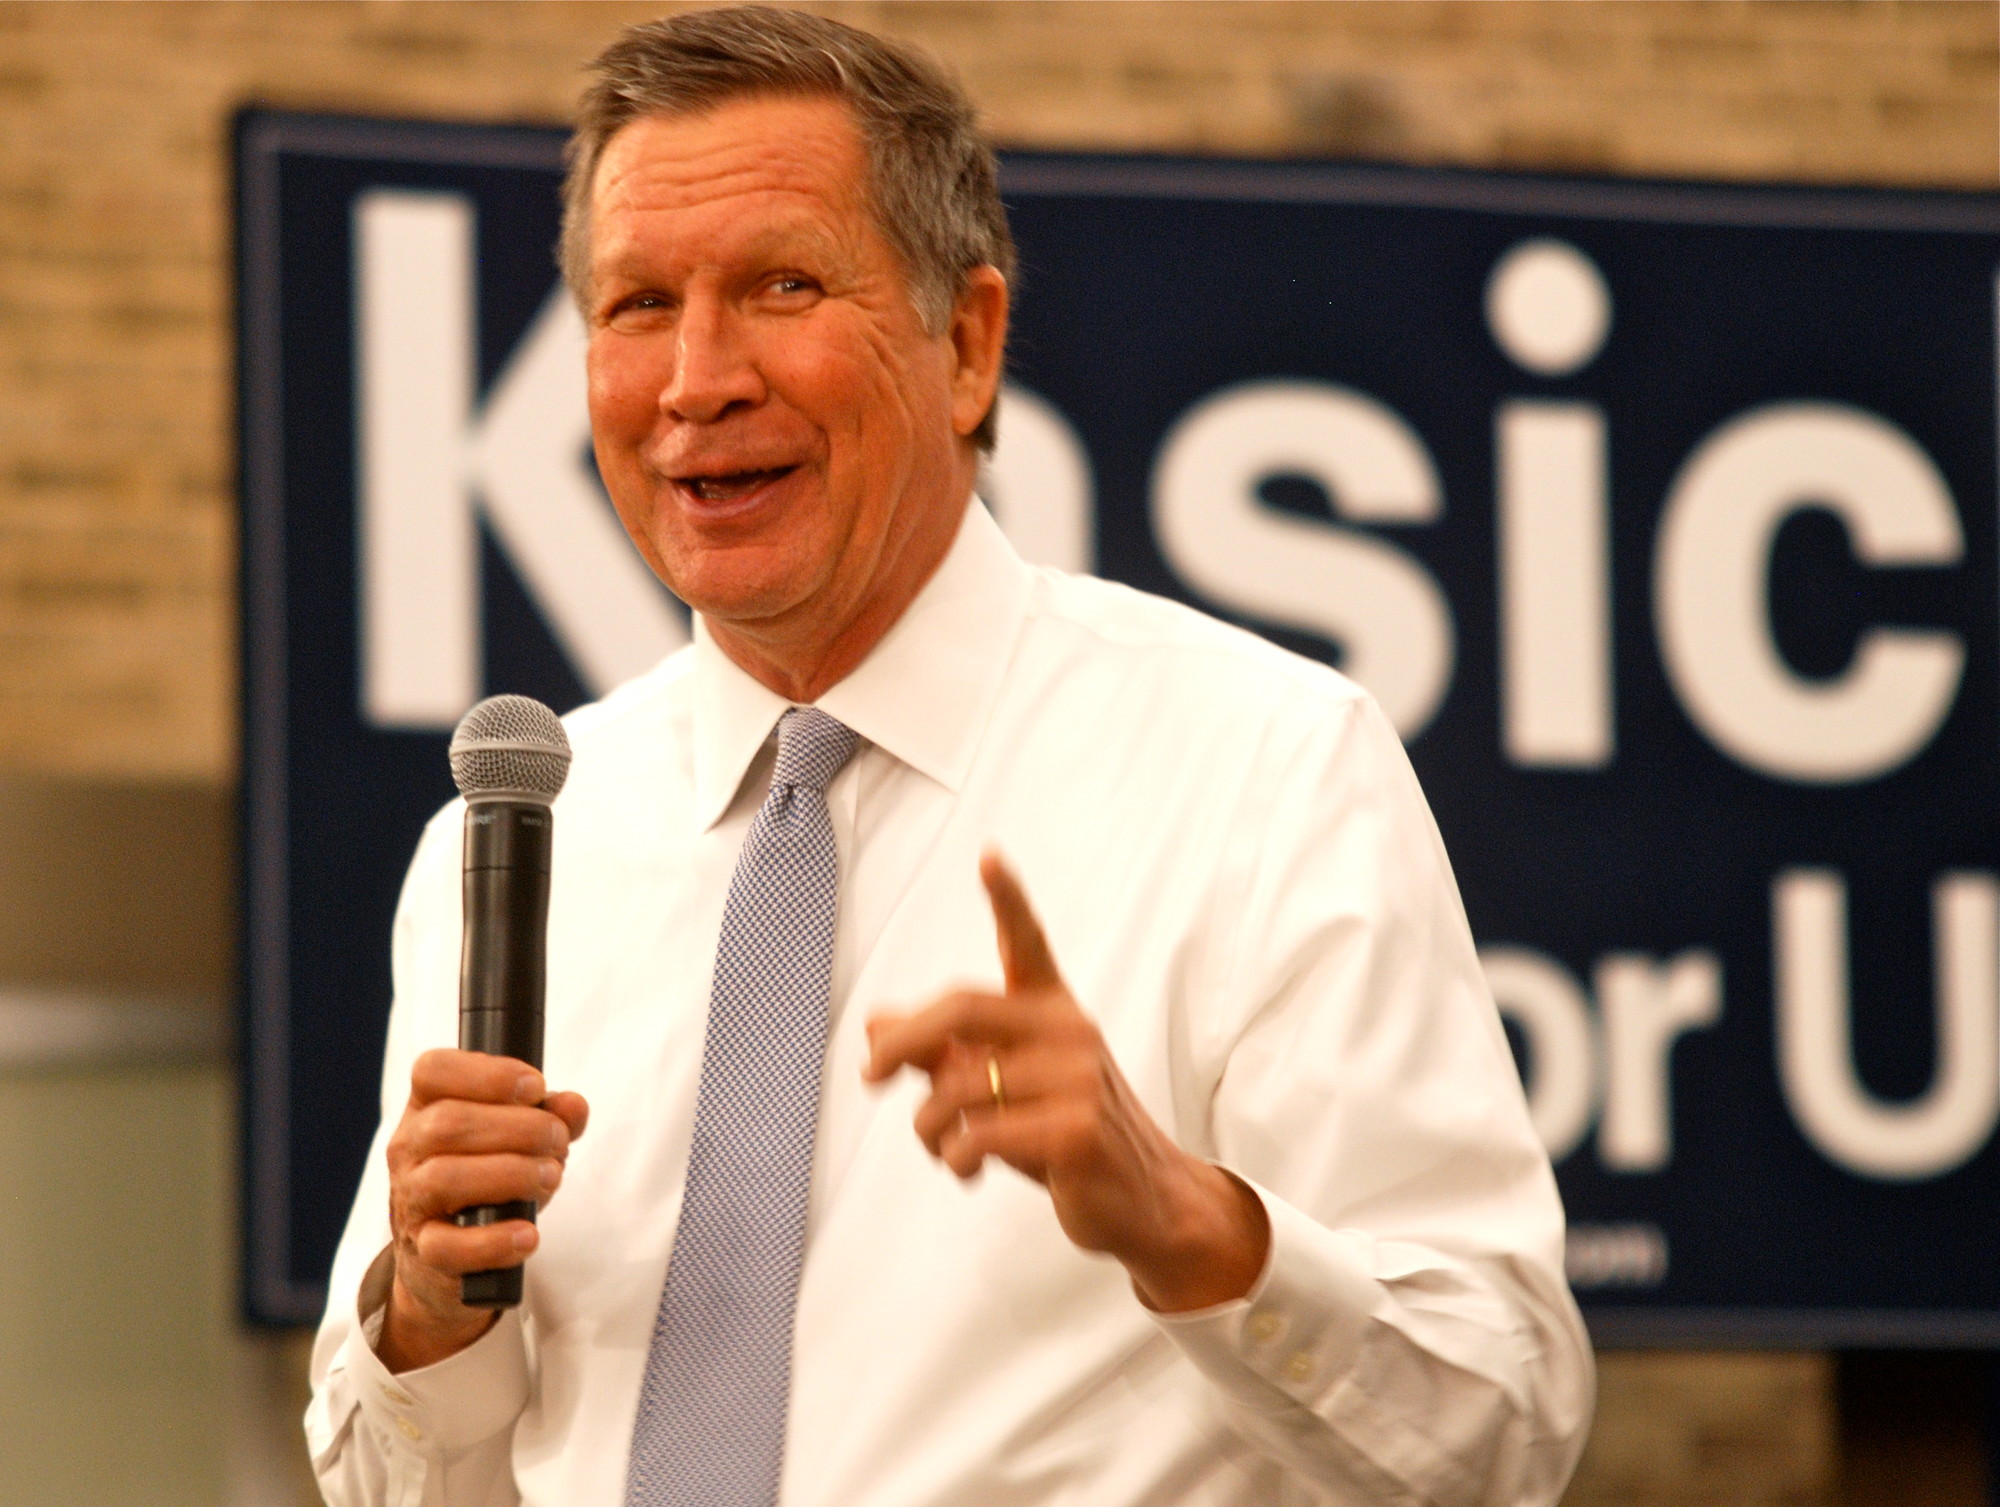 Kasich addressed issues from the national debt to student loans.